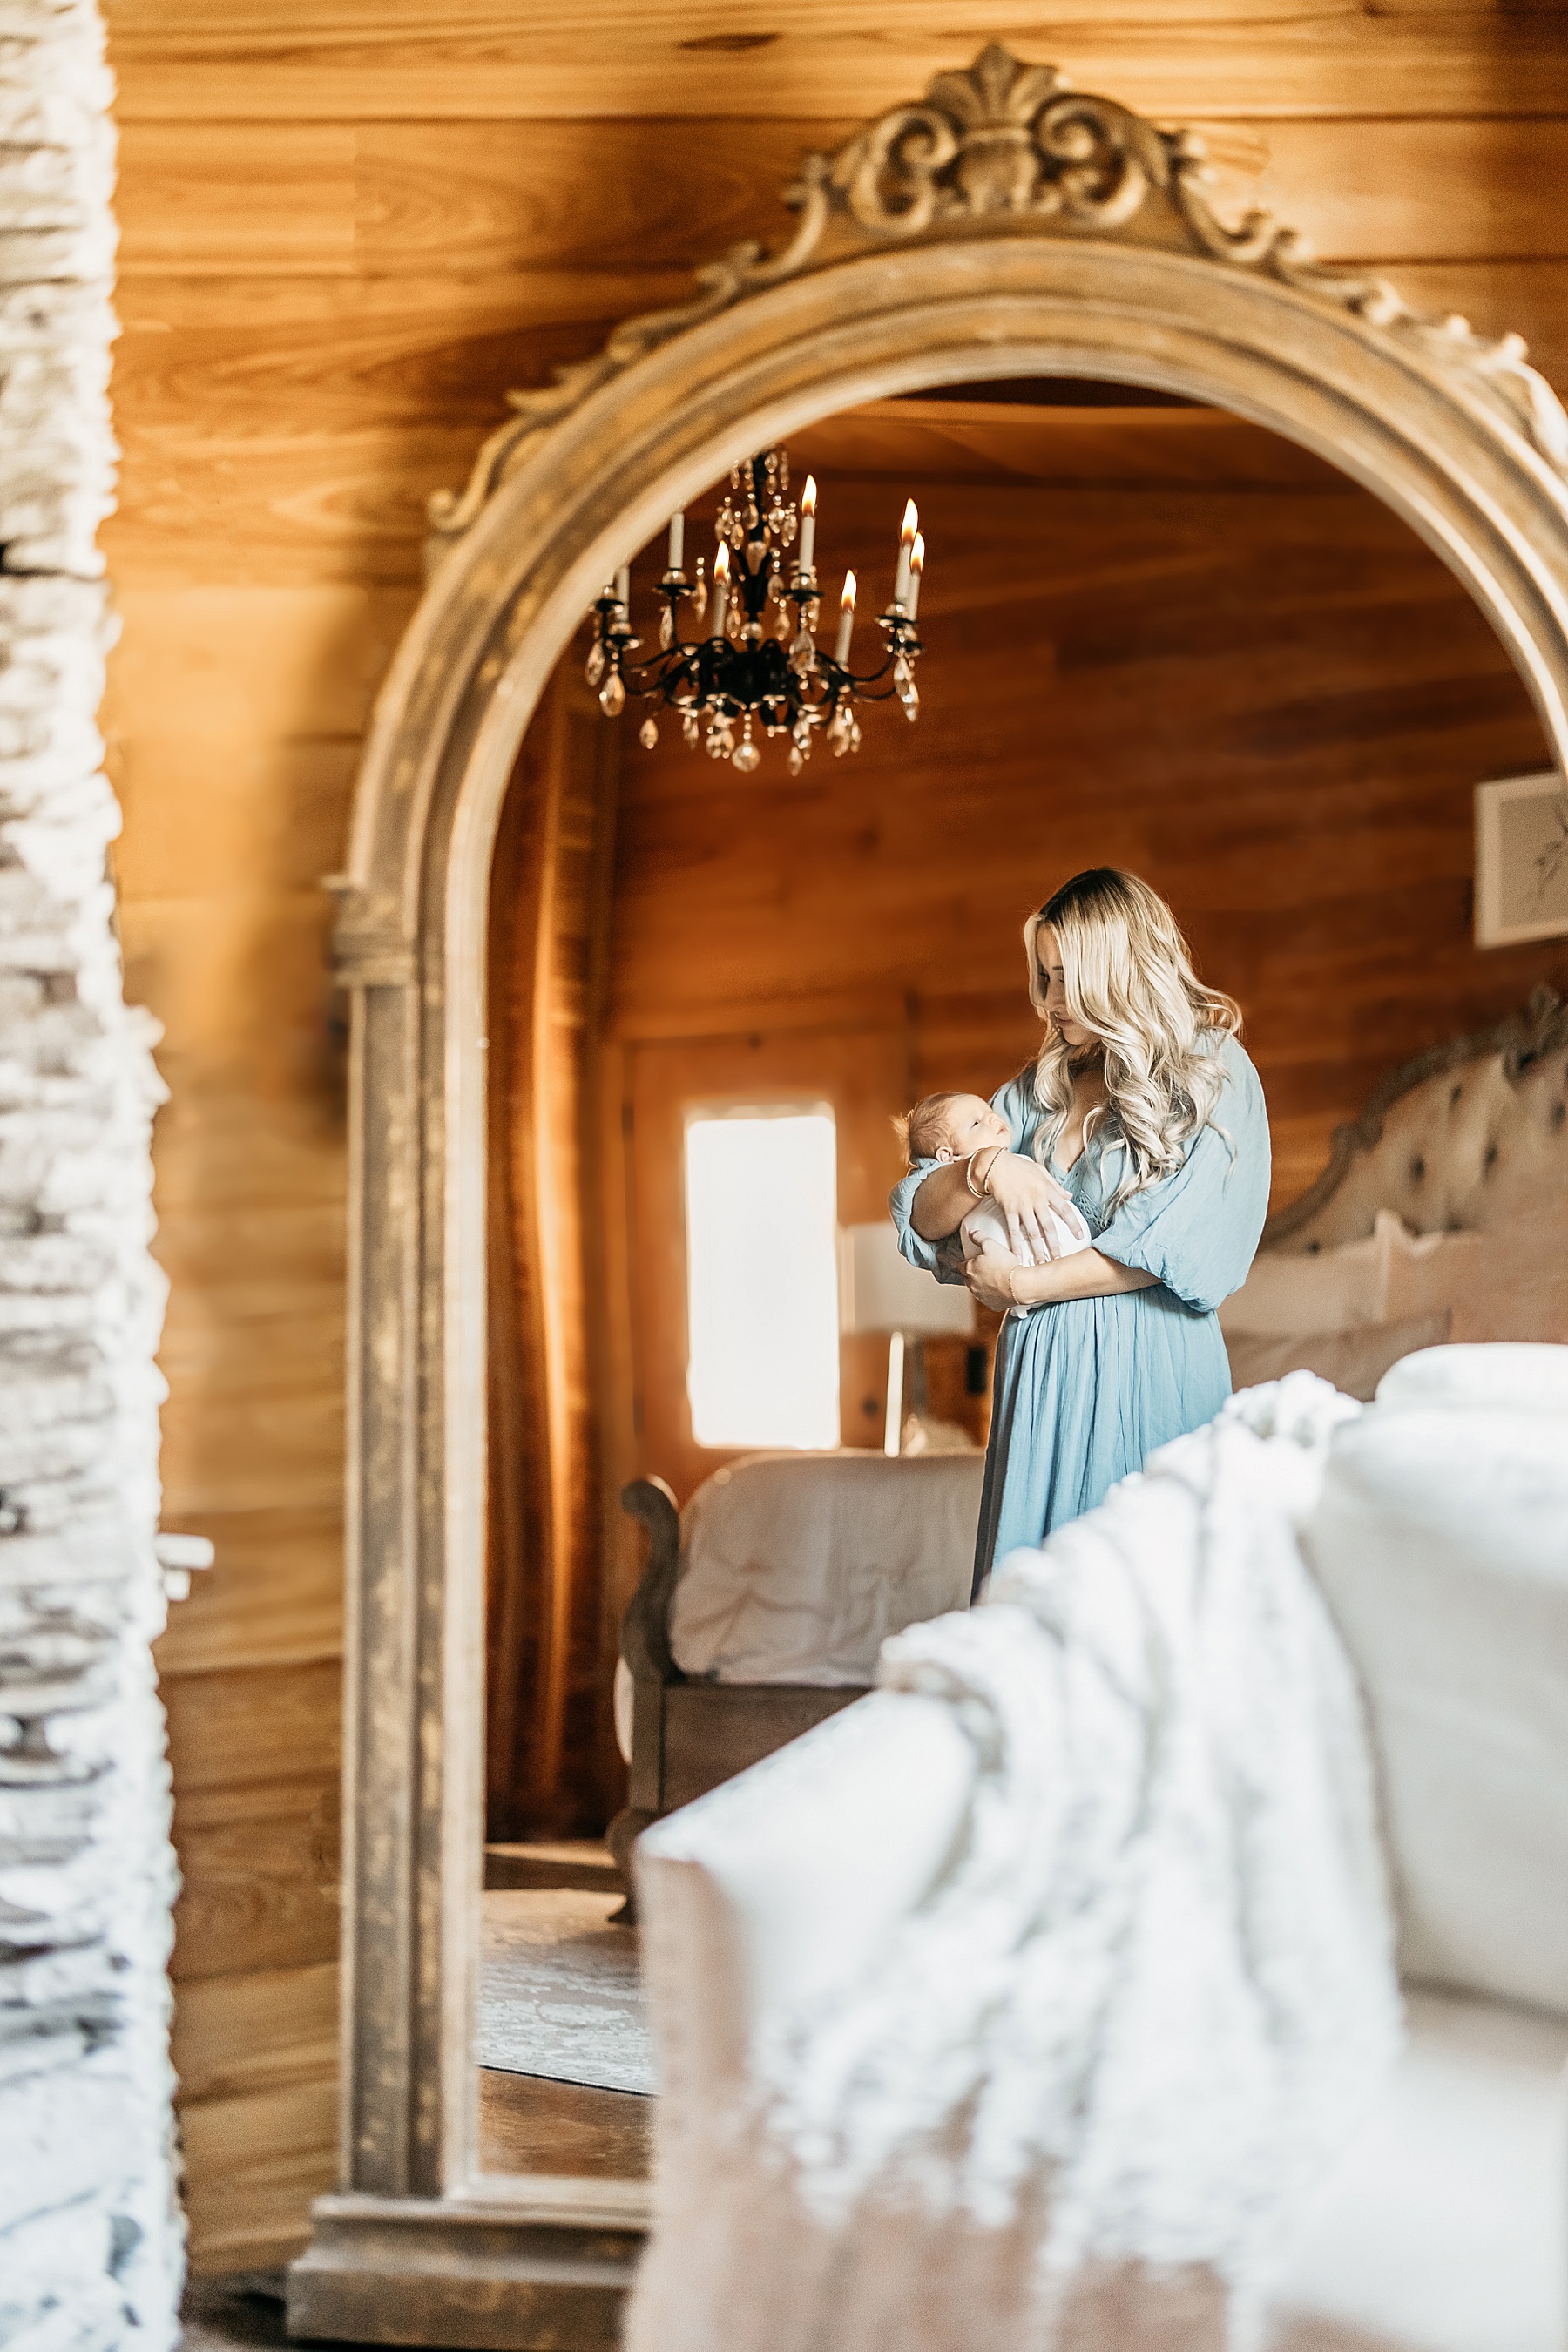 blond haired woman in maxi dress holding newborn baby boy in front of huge antique gold mirror